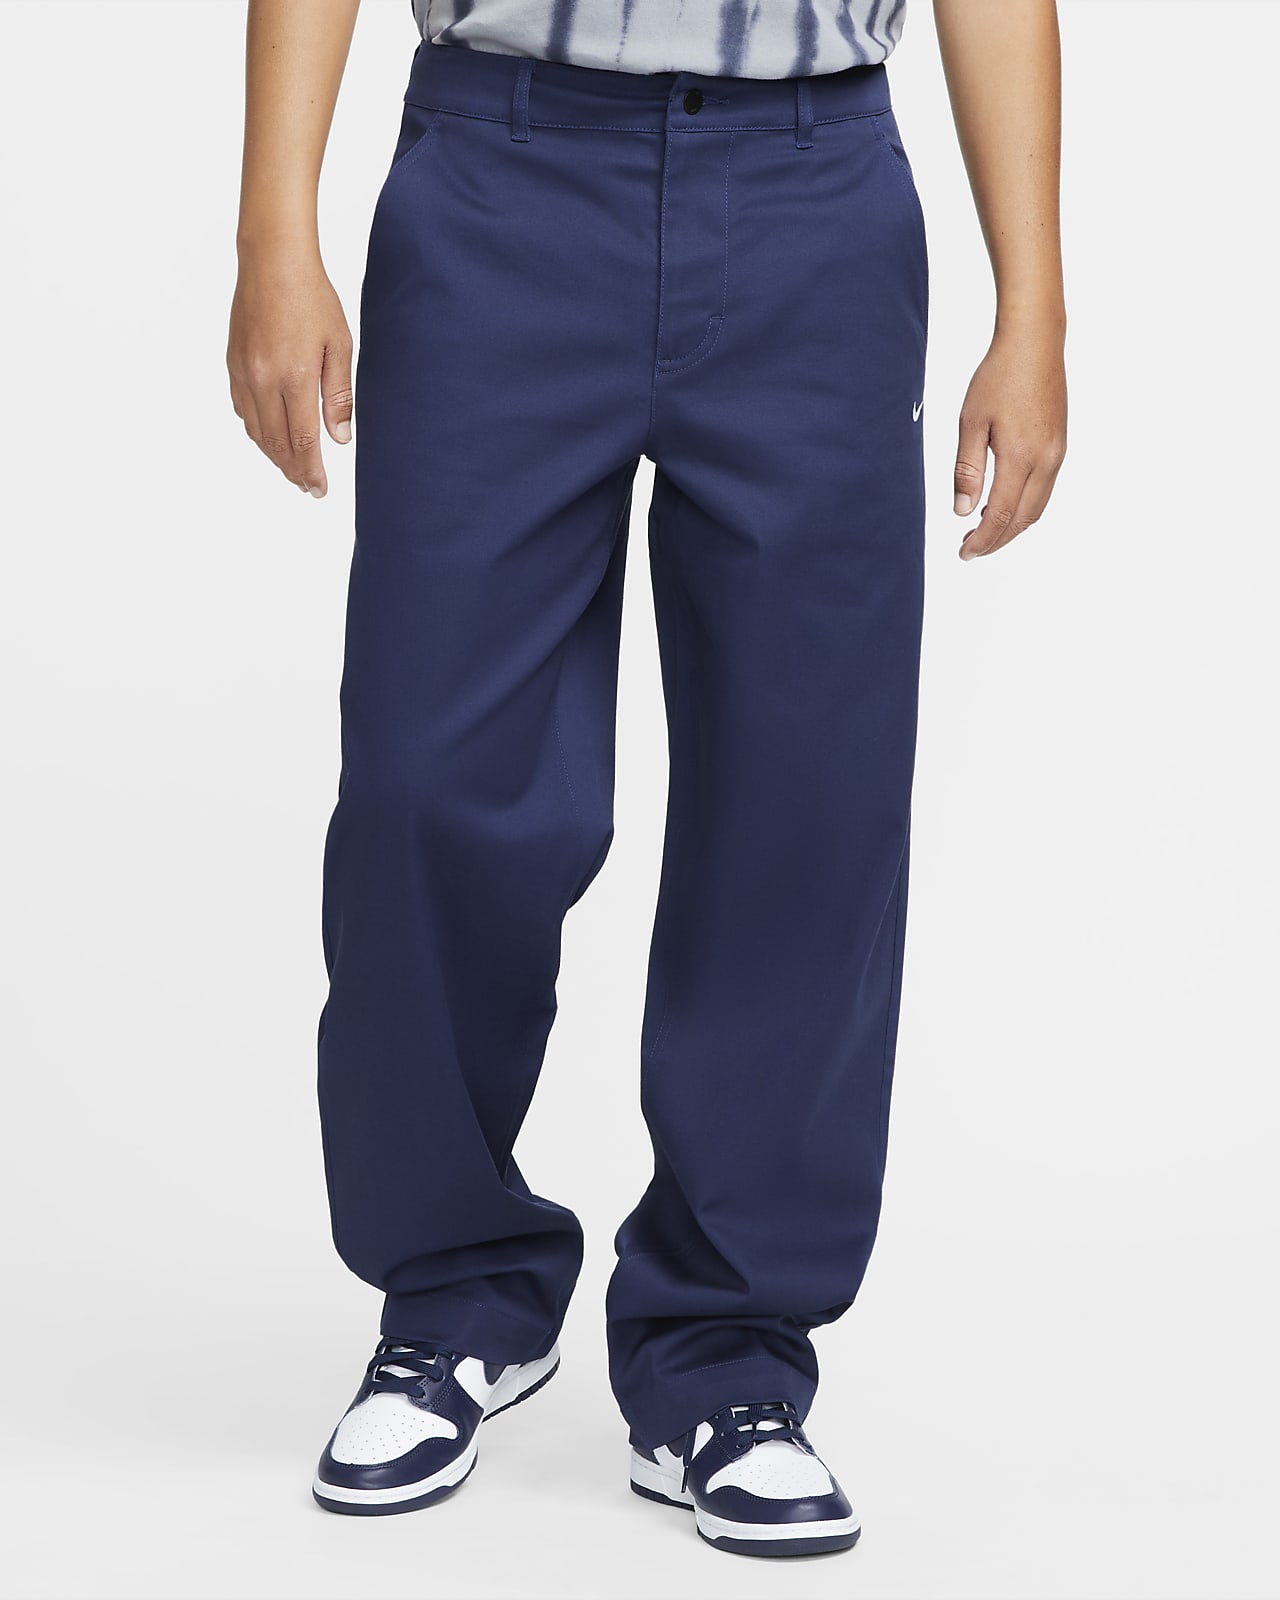 Nike Life Men's Unlined Cotton Chino Trousers